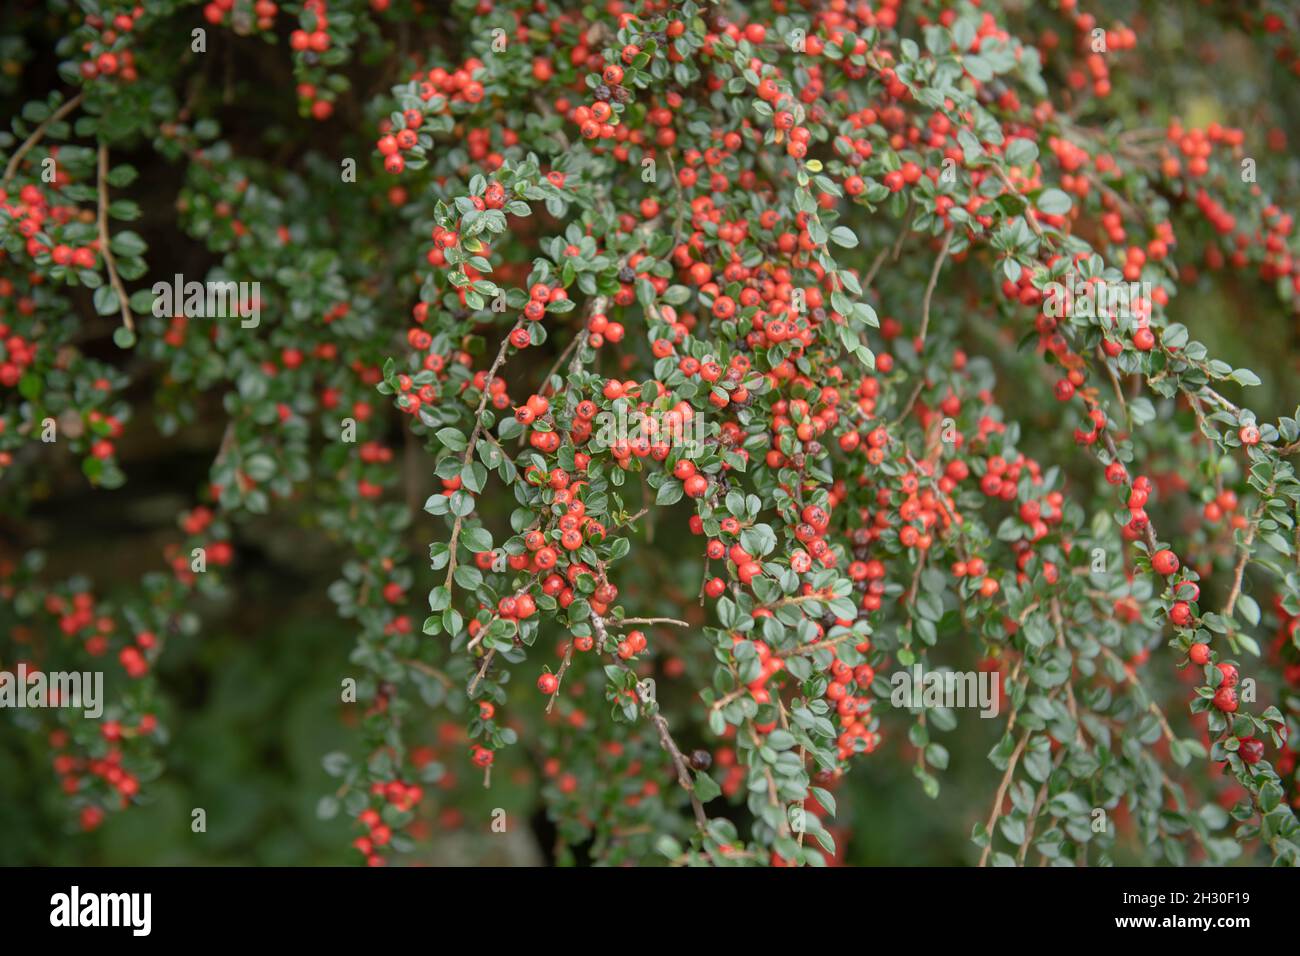 Autumn Red Berries and Green Leaves on the Branches of a Dwarf Deciduous Wall Spray Shrub (Cotoneaster horizontalis) Growing in a Garden Devon Stock Photo